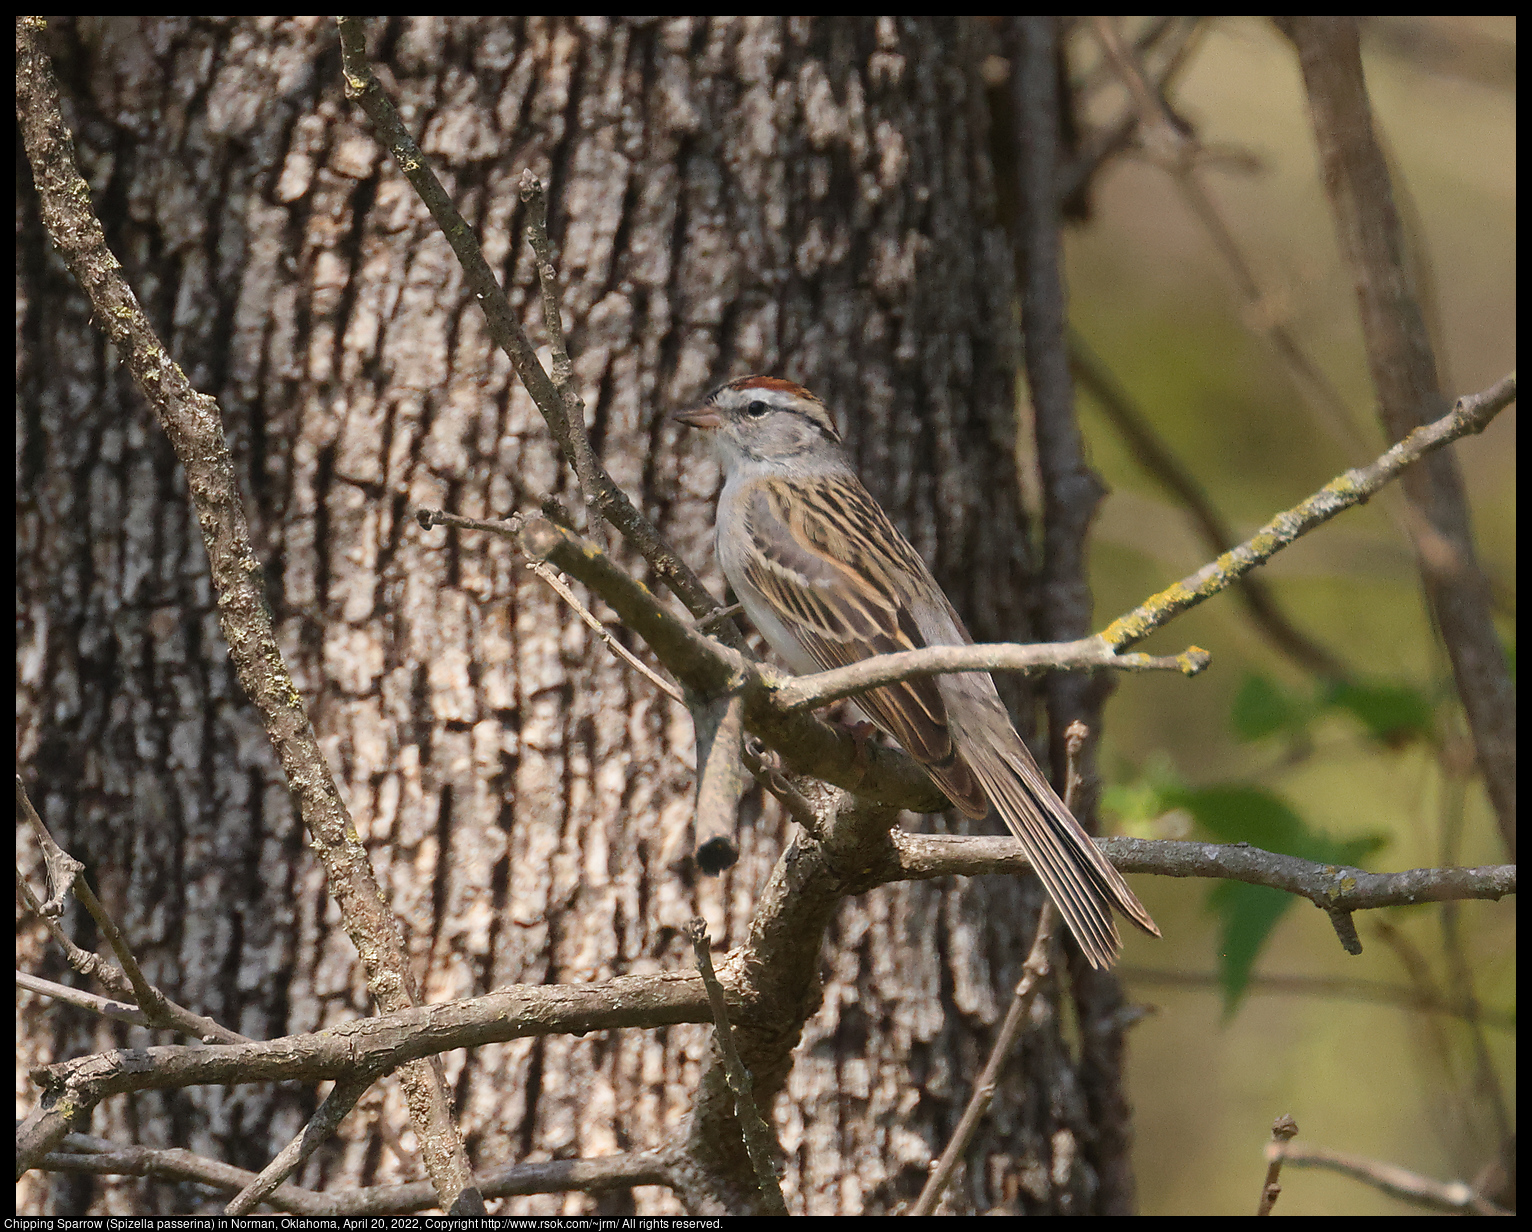 Chipping Sparrow (Spizella passerina) in Norman, Oklahoma, April 20, 2022